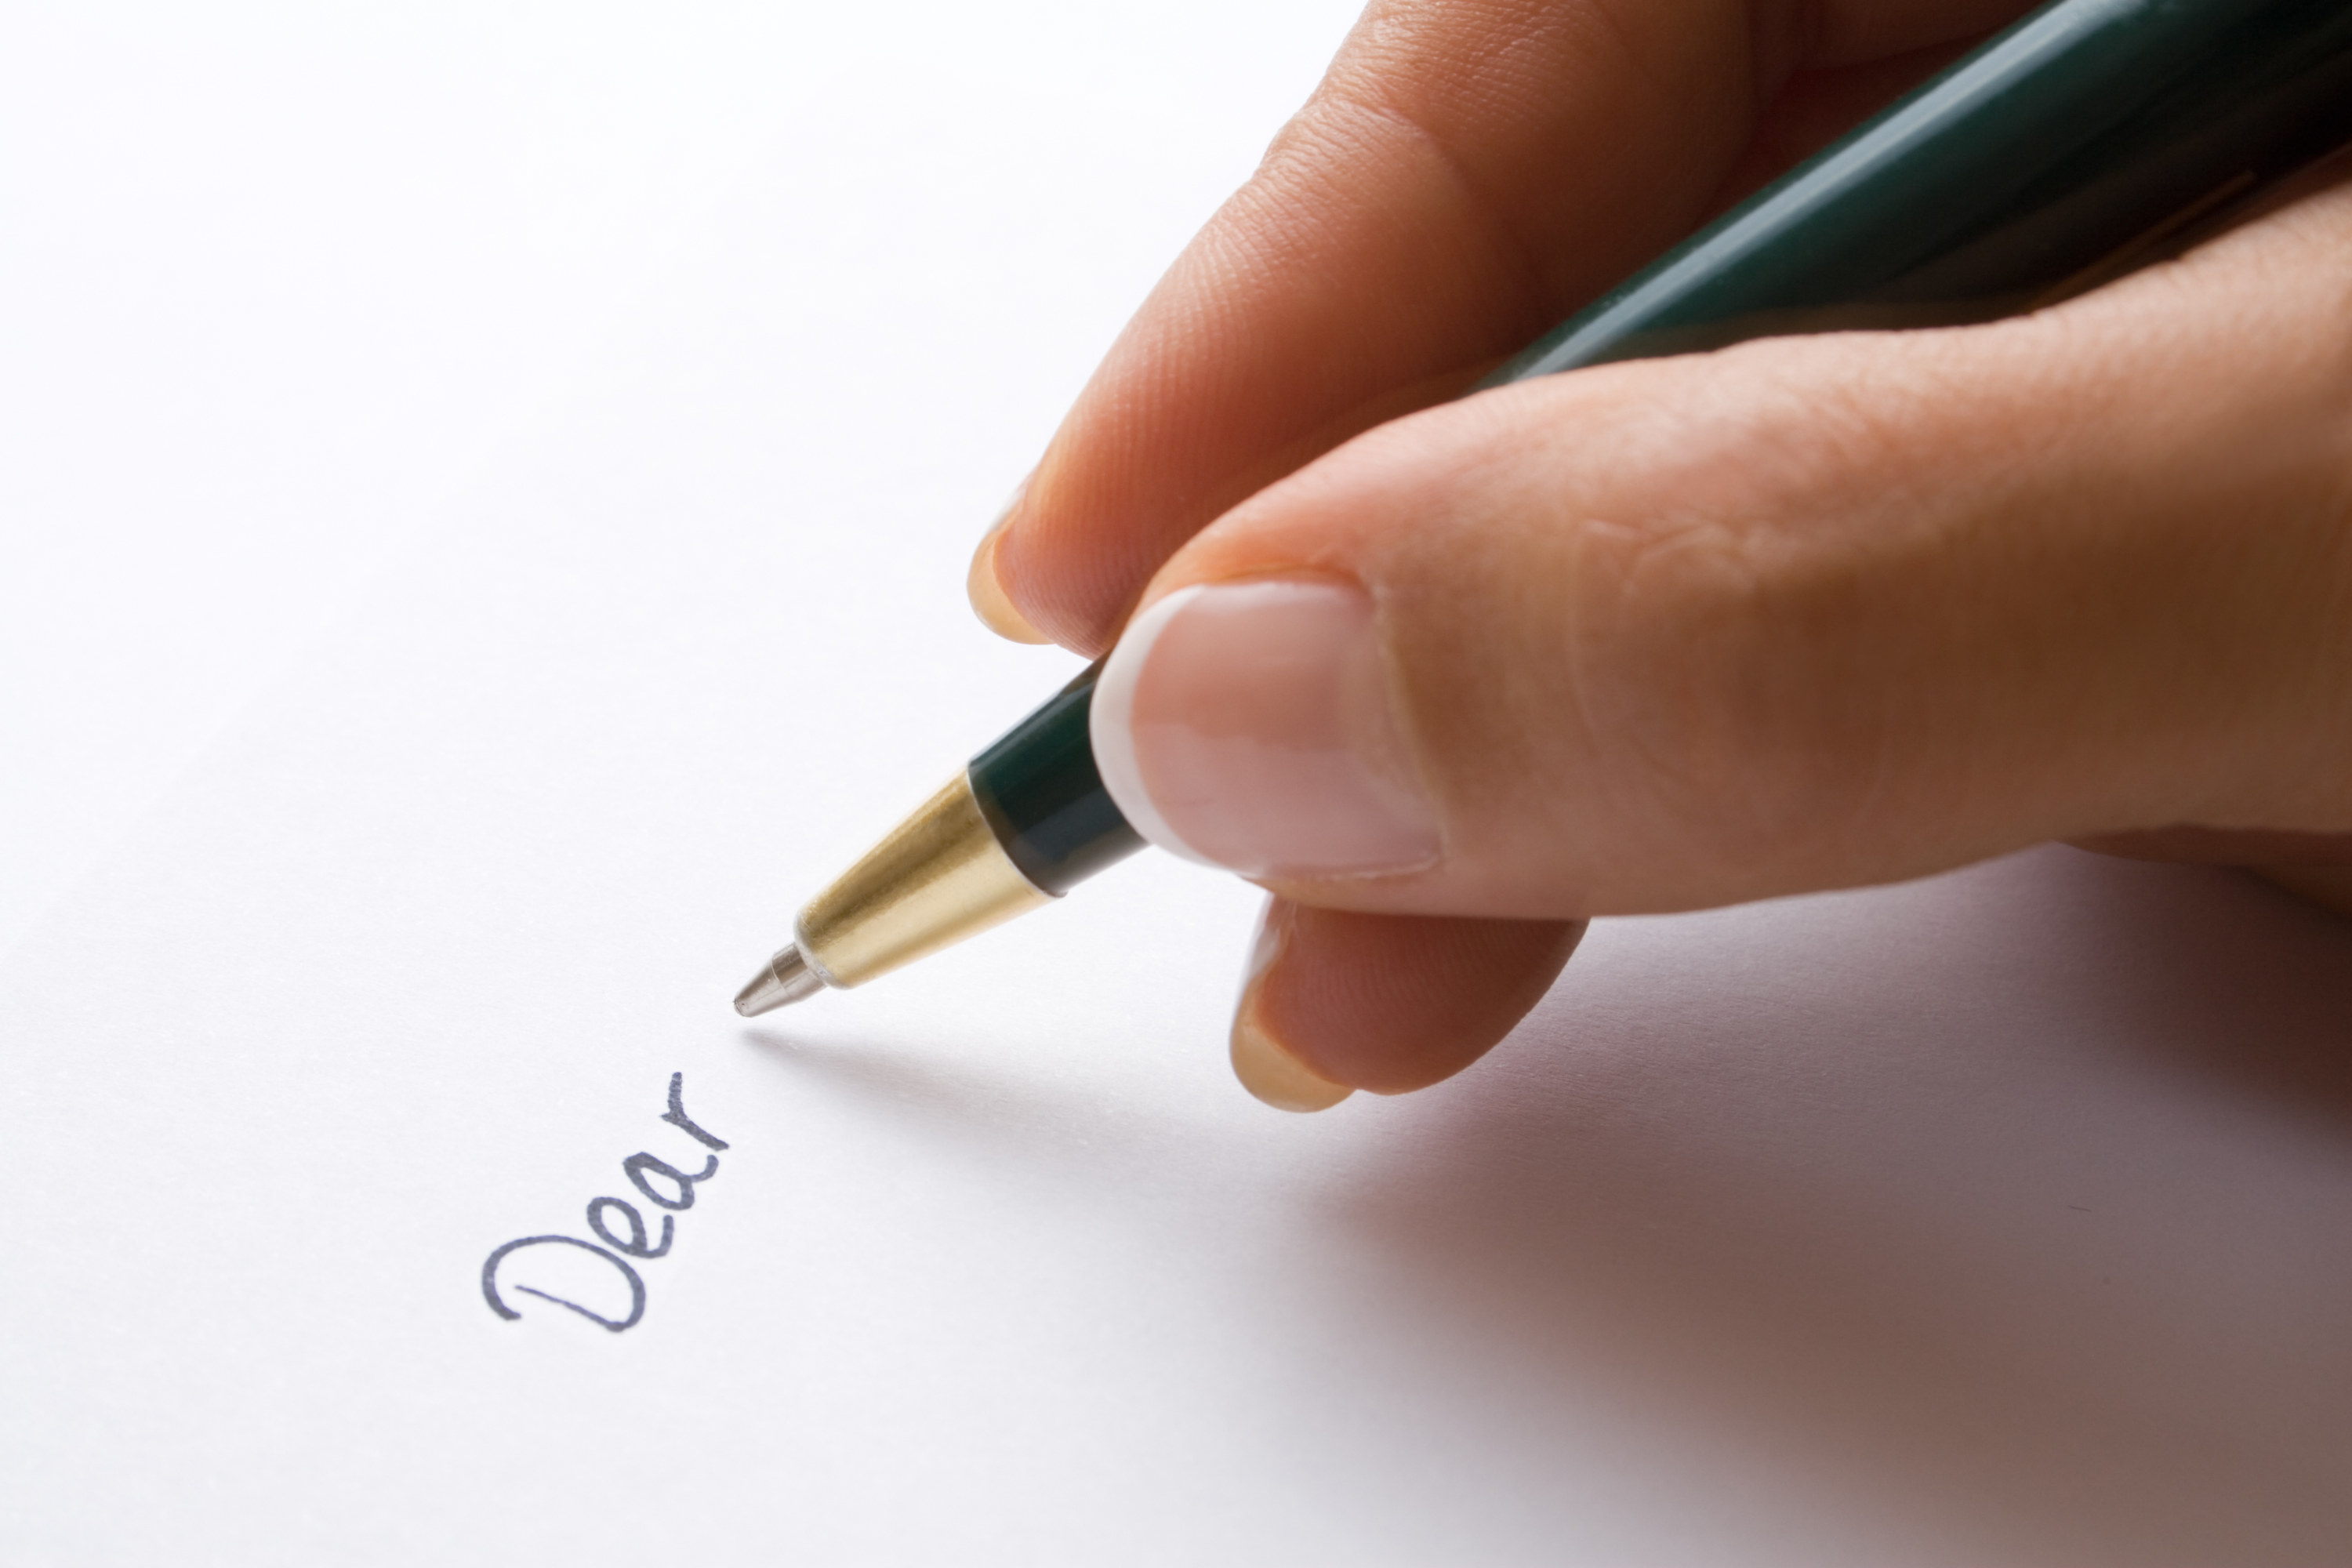 A person starting a letter with &quot;Dear&quot;